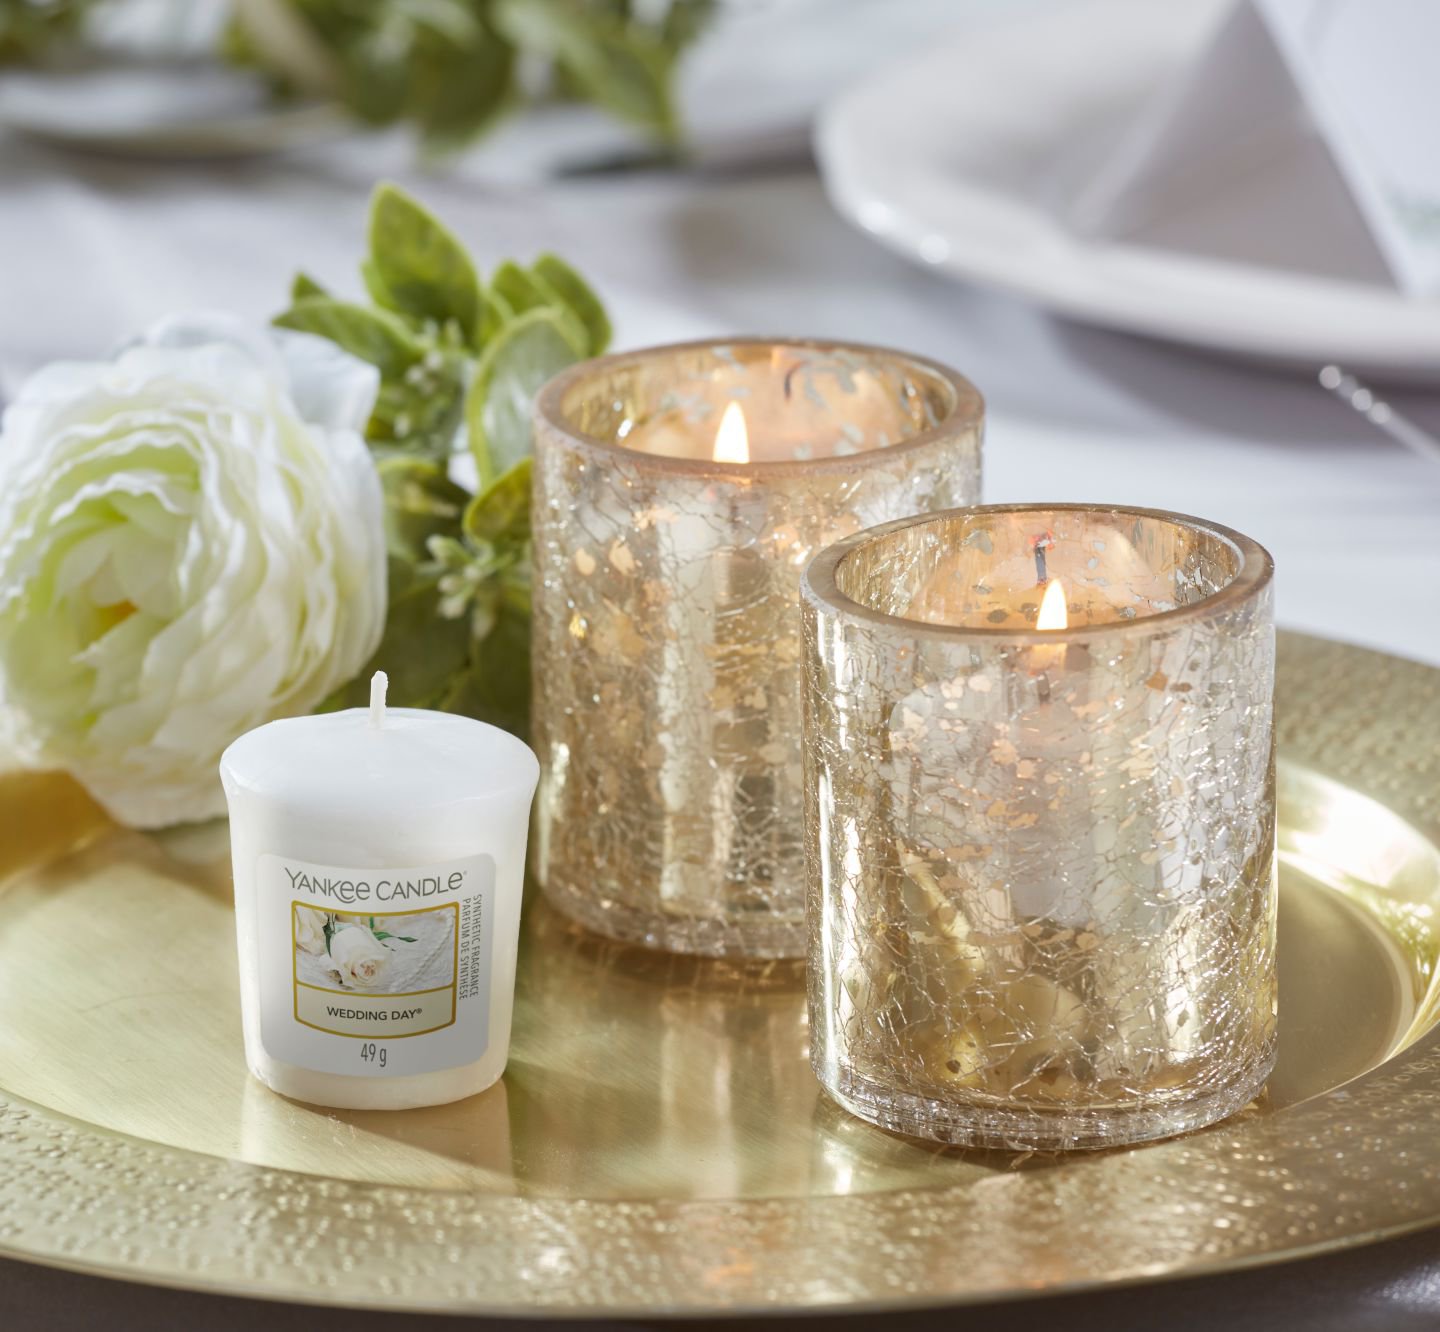 5 Reasons Candles Make the Best Wedding Gifts